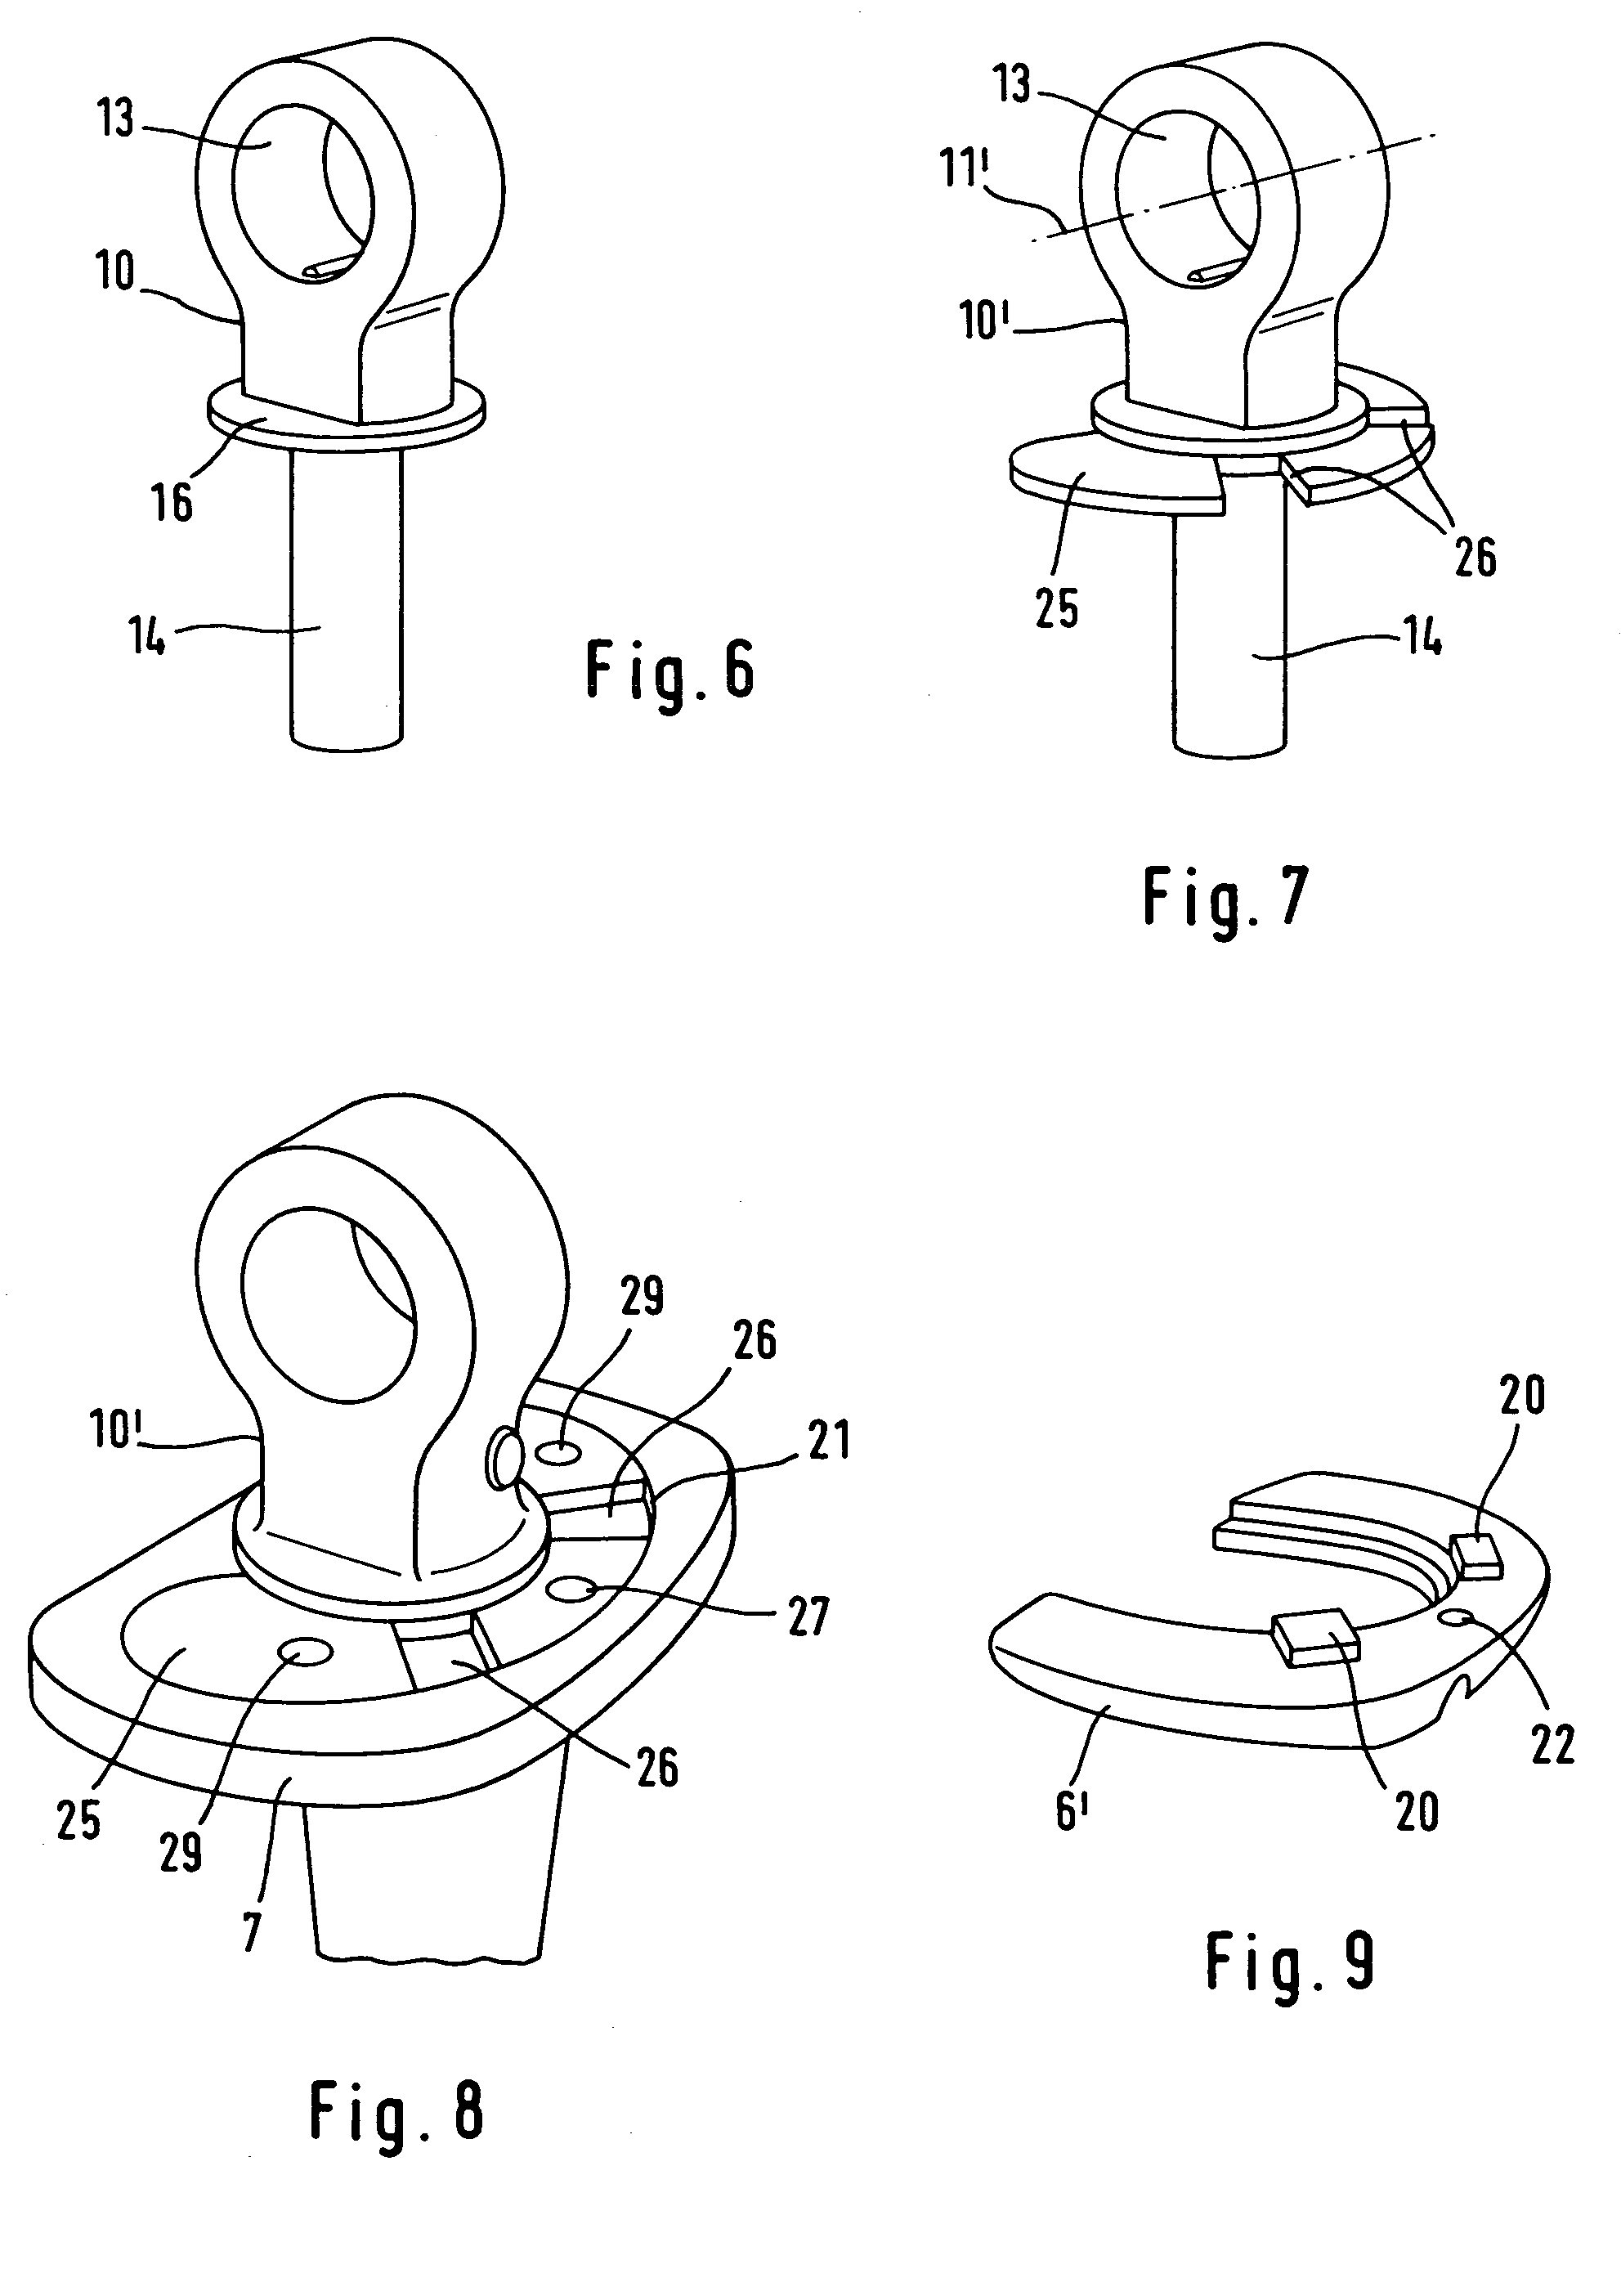 Knee prosthesis with rotation bearing